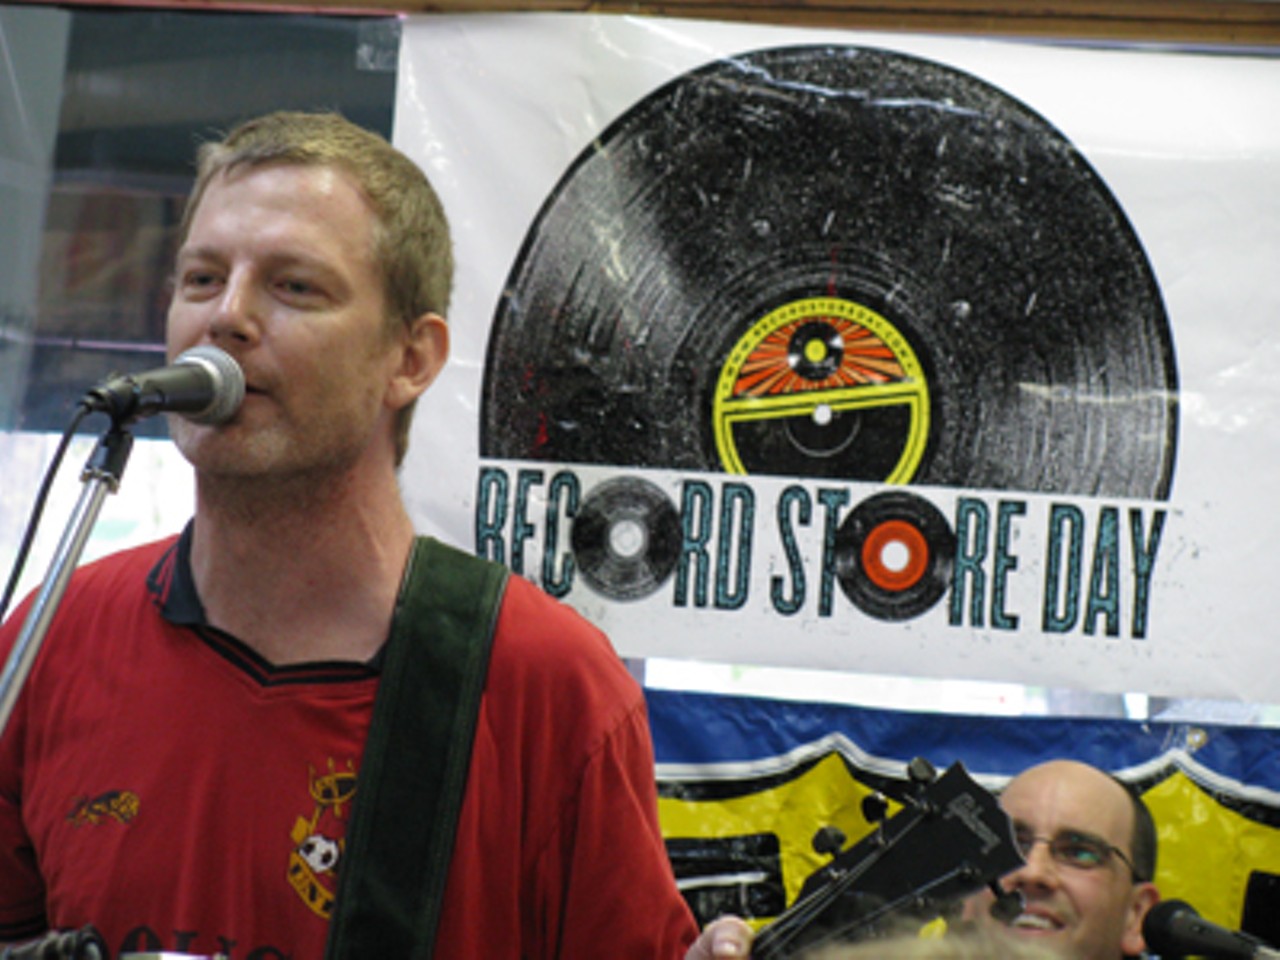 Bent vocalist Rob Wagoner, pictured here, noted that it had a "new" CD for sale.